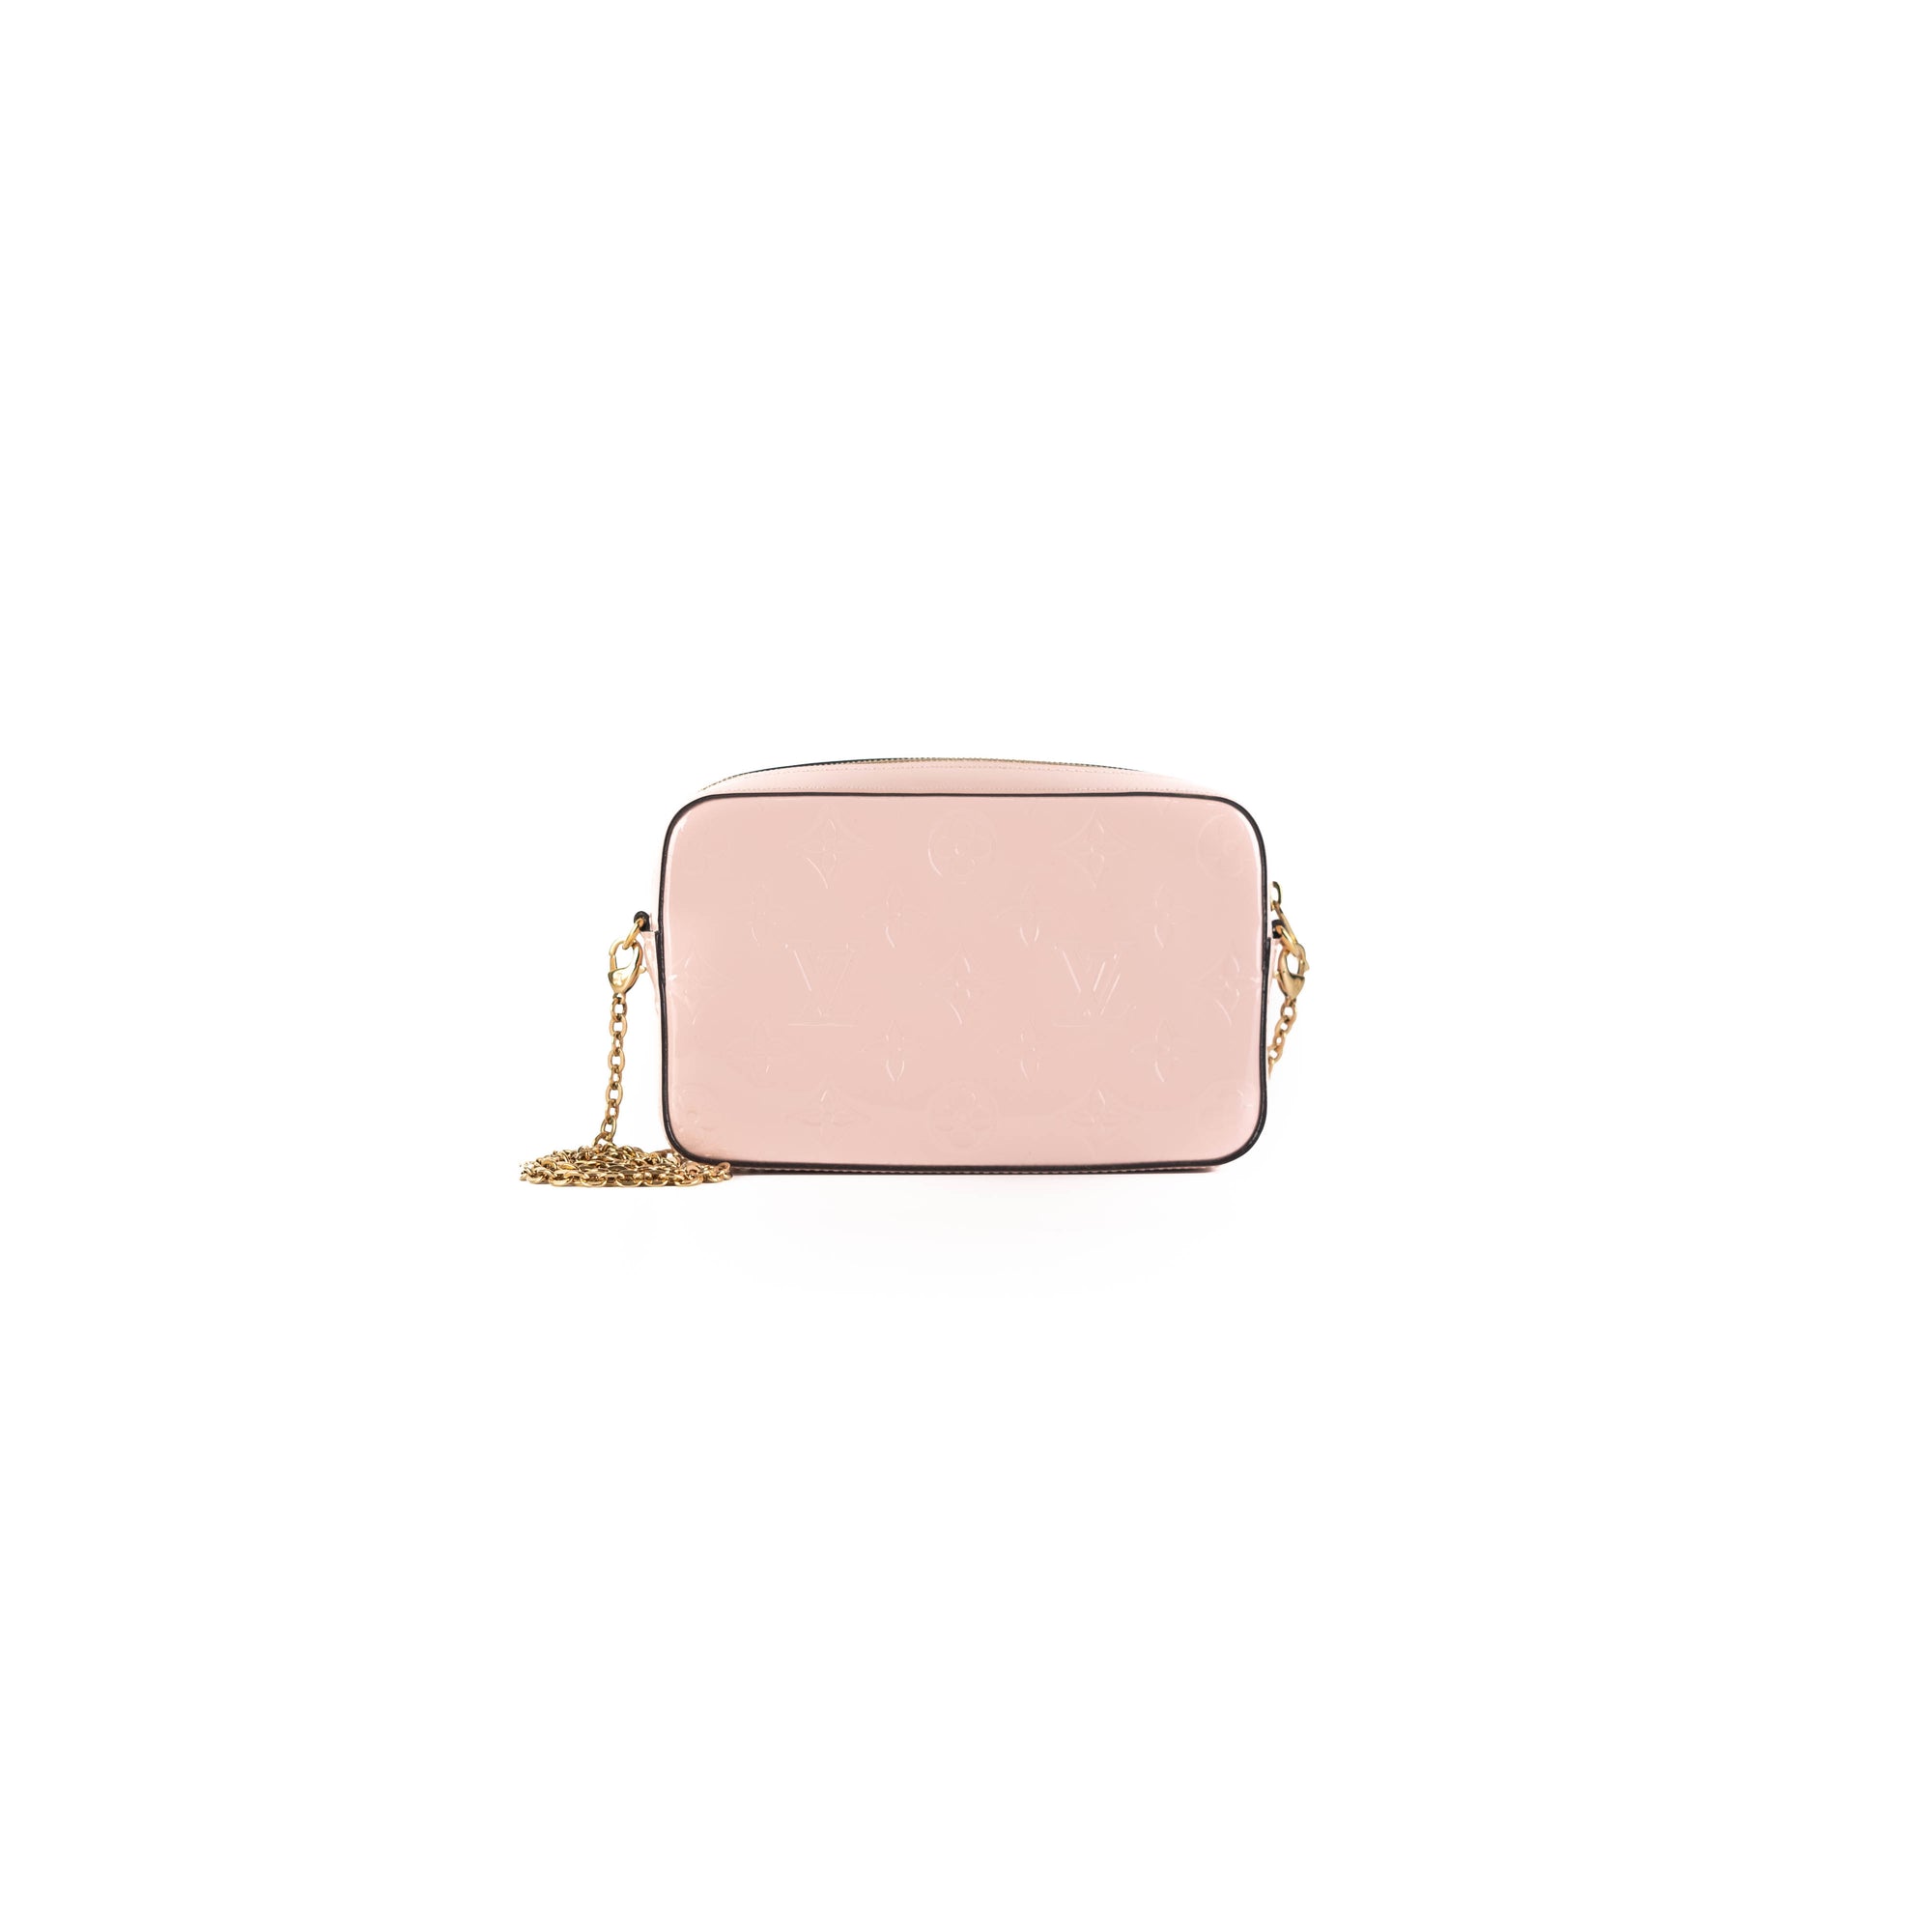 Naughtipidgins Nest - Louis Vuitton Camera Pouch in Rose Ballerine Monogram  Vernis. Crafted from a beautiful pale rose-pink Monogram embossed patent  calf leather with two removable card pouches, this neat, compact, zip